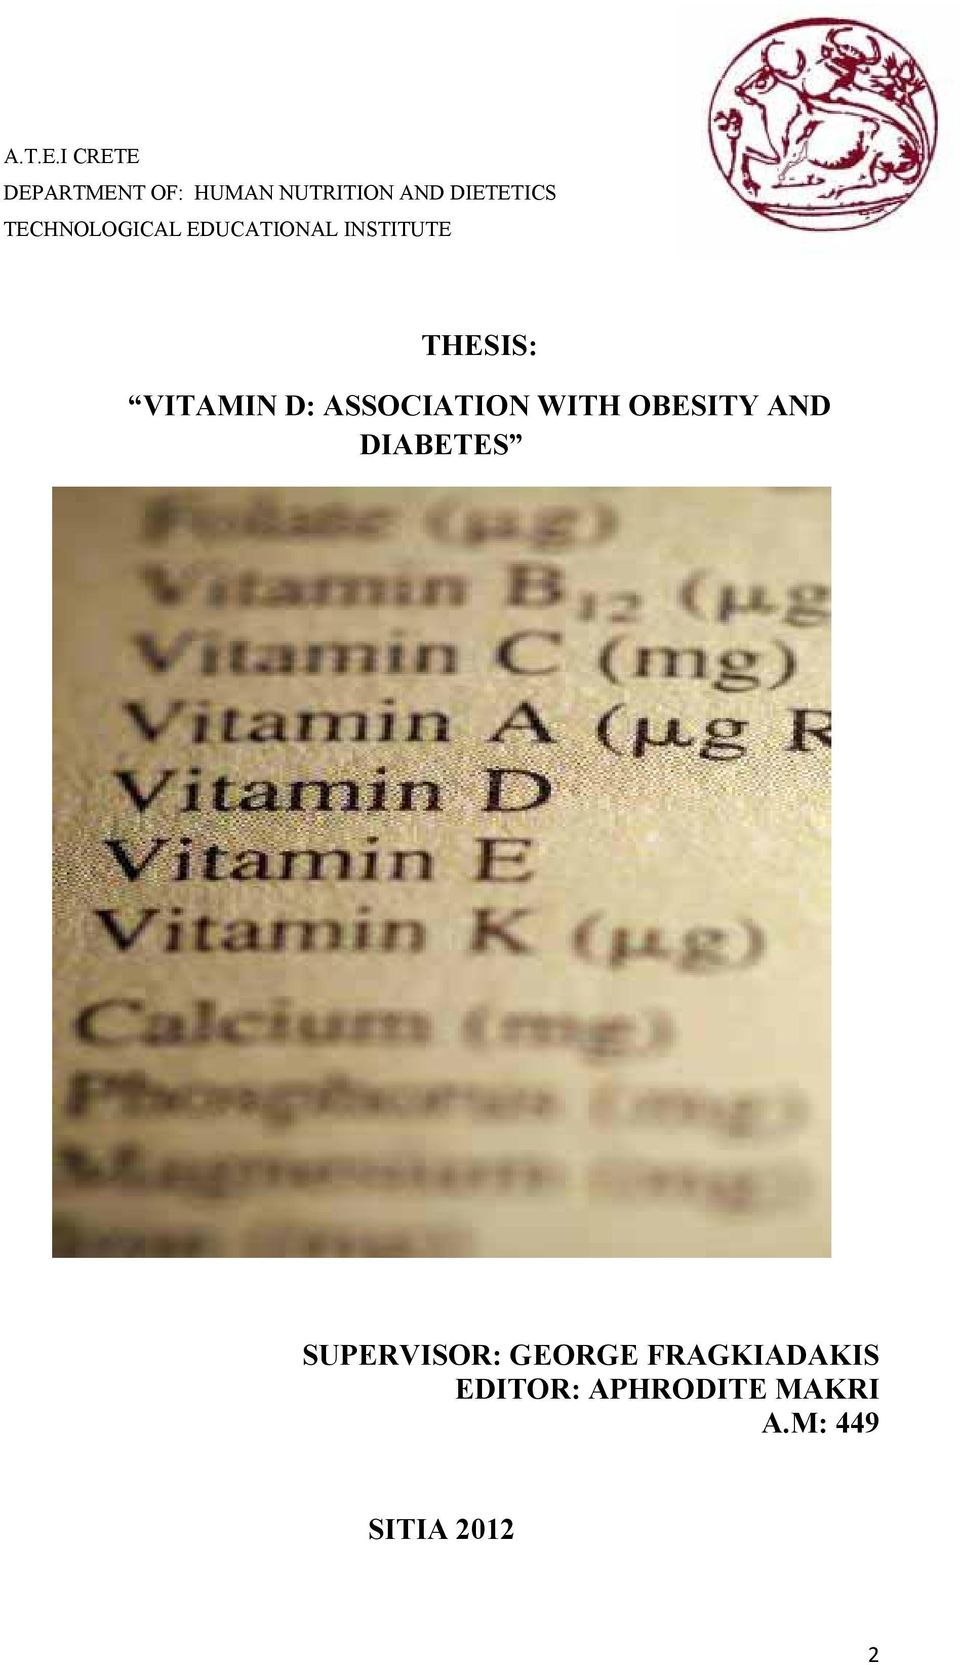 TECHNOLOGICAL EDUCATIONAL INSTITUTE THESIS: VITAMIN D: